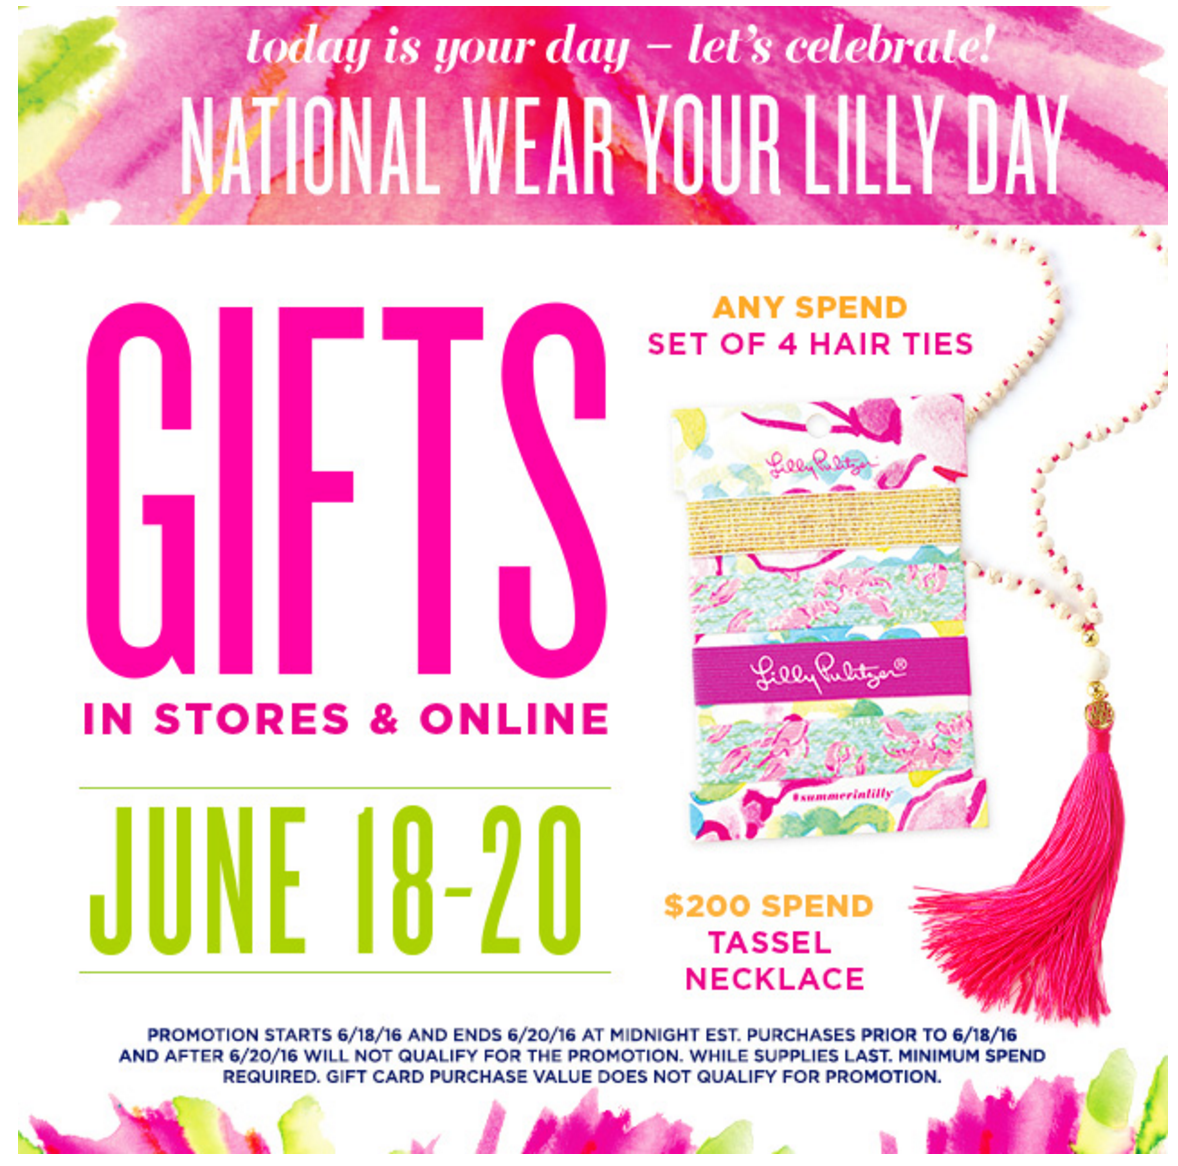 National Wear Your Lilly Day!